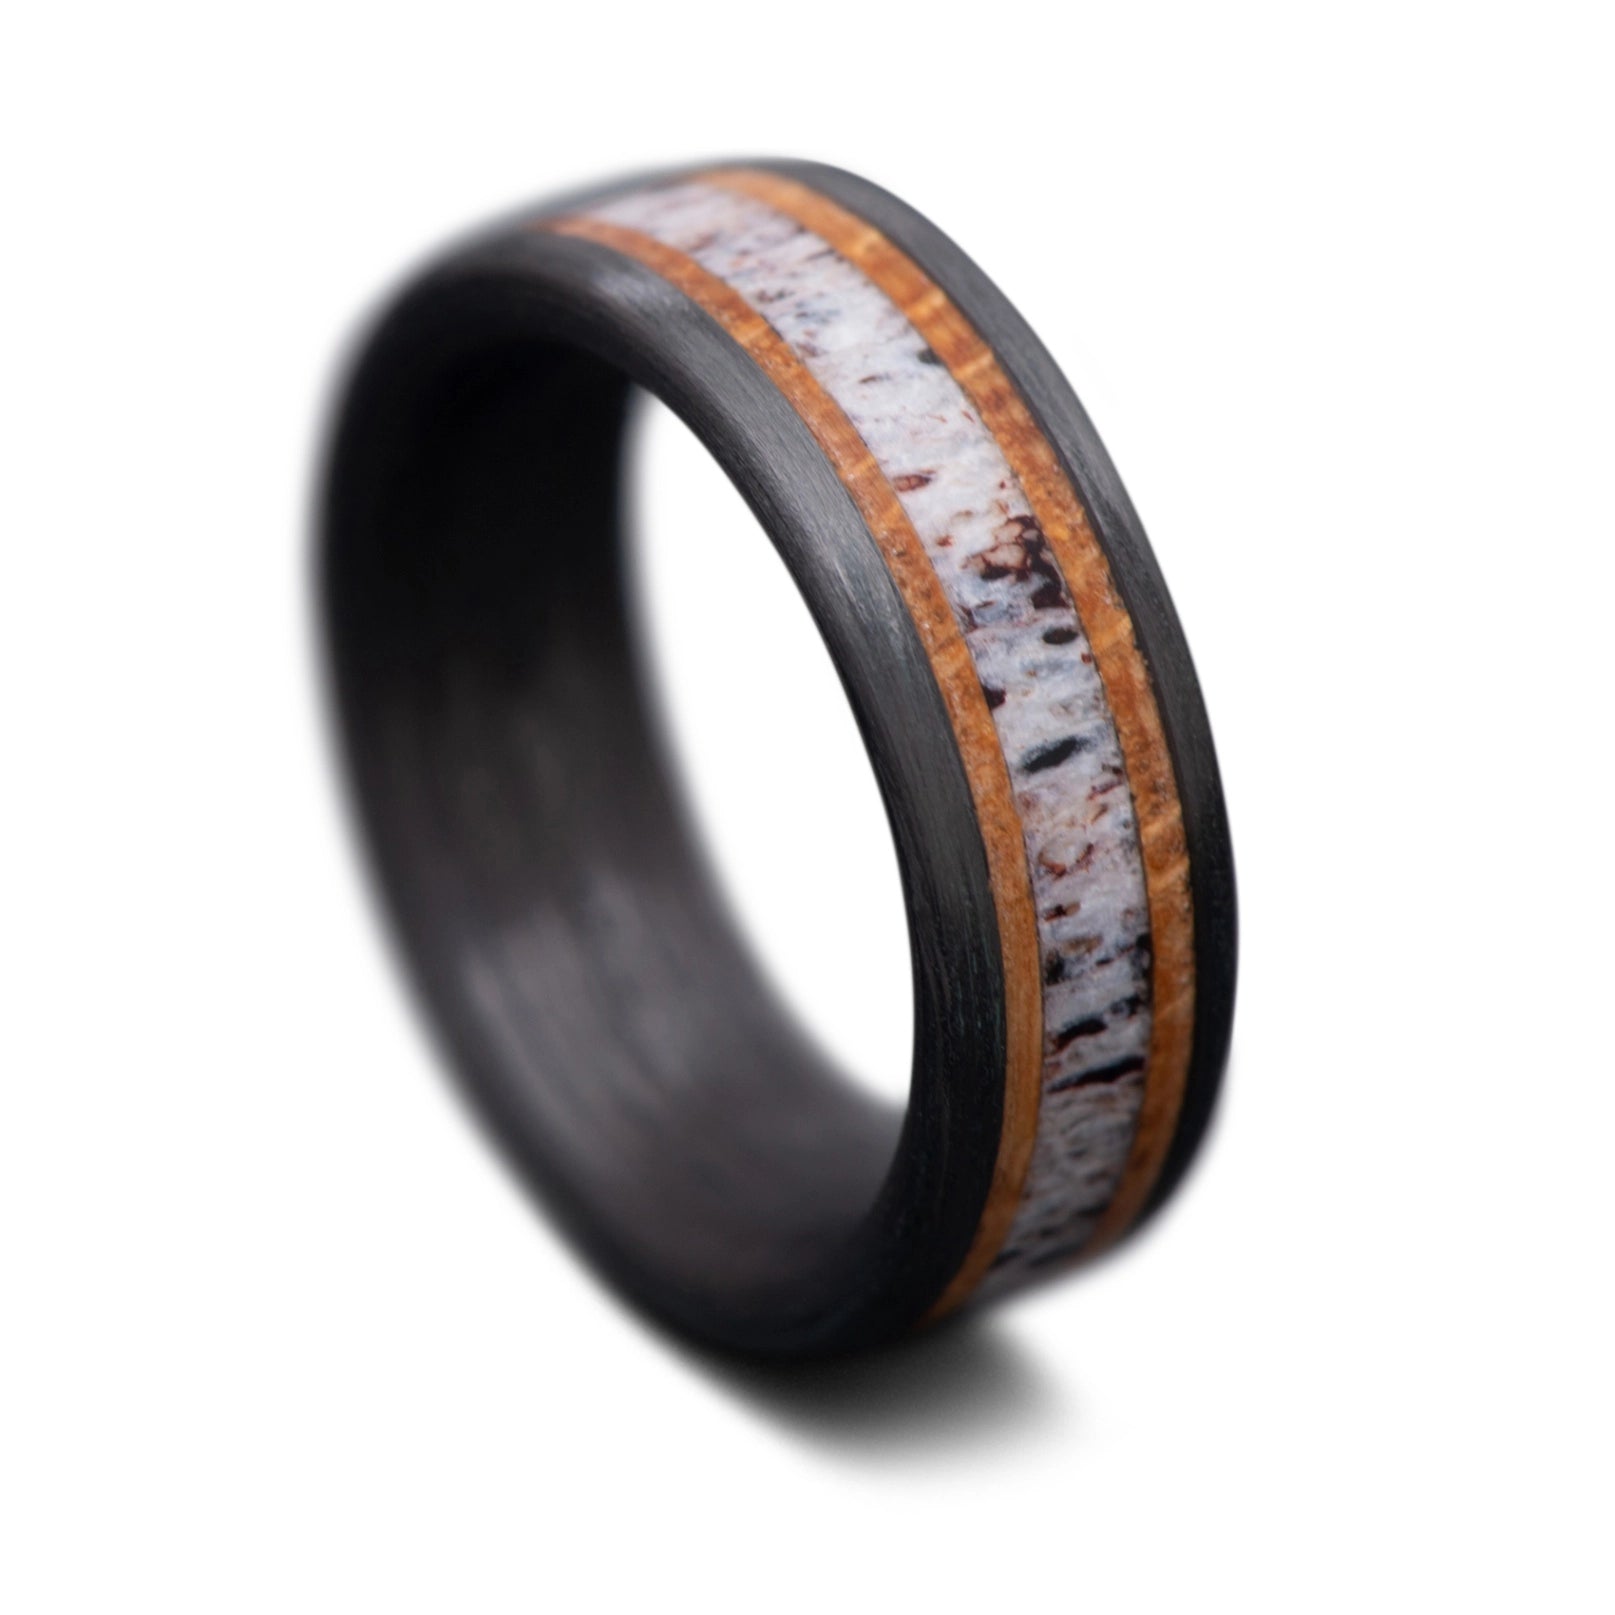 CarbonUni Core Ring with Deer Antler and Whiskey Barrel Oak inner sleeve, 7mm - THE MATRIX